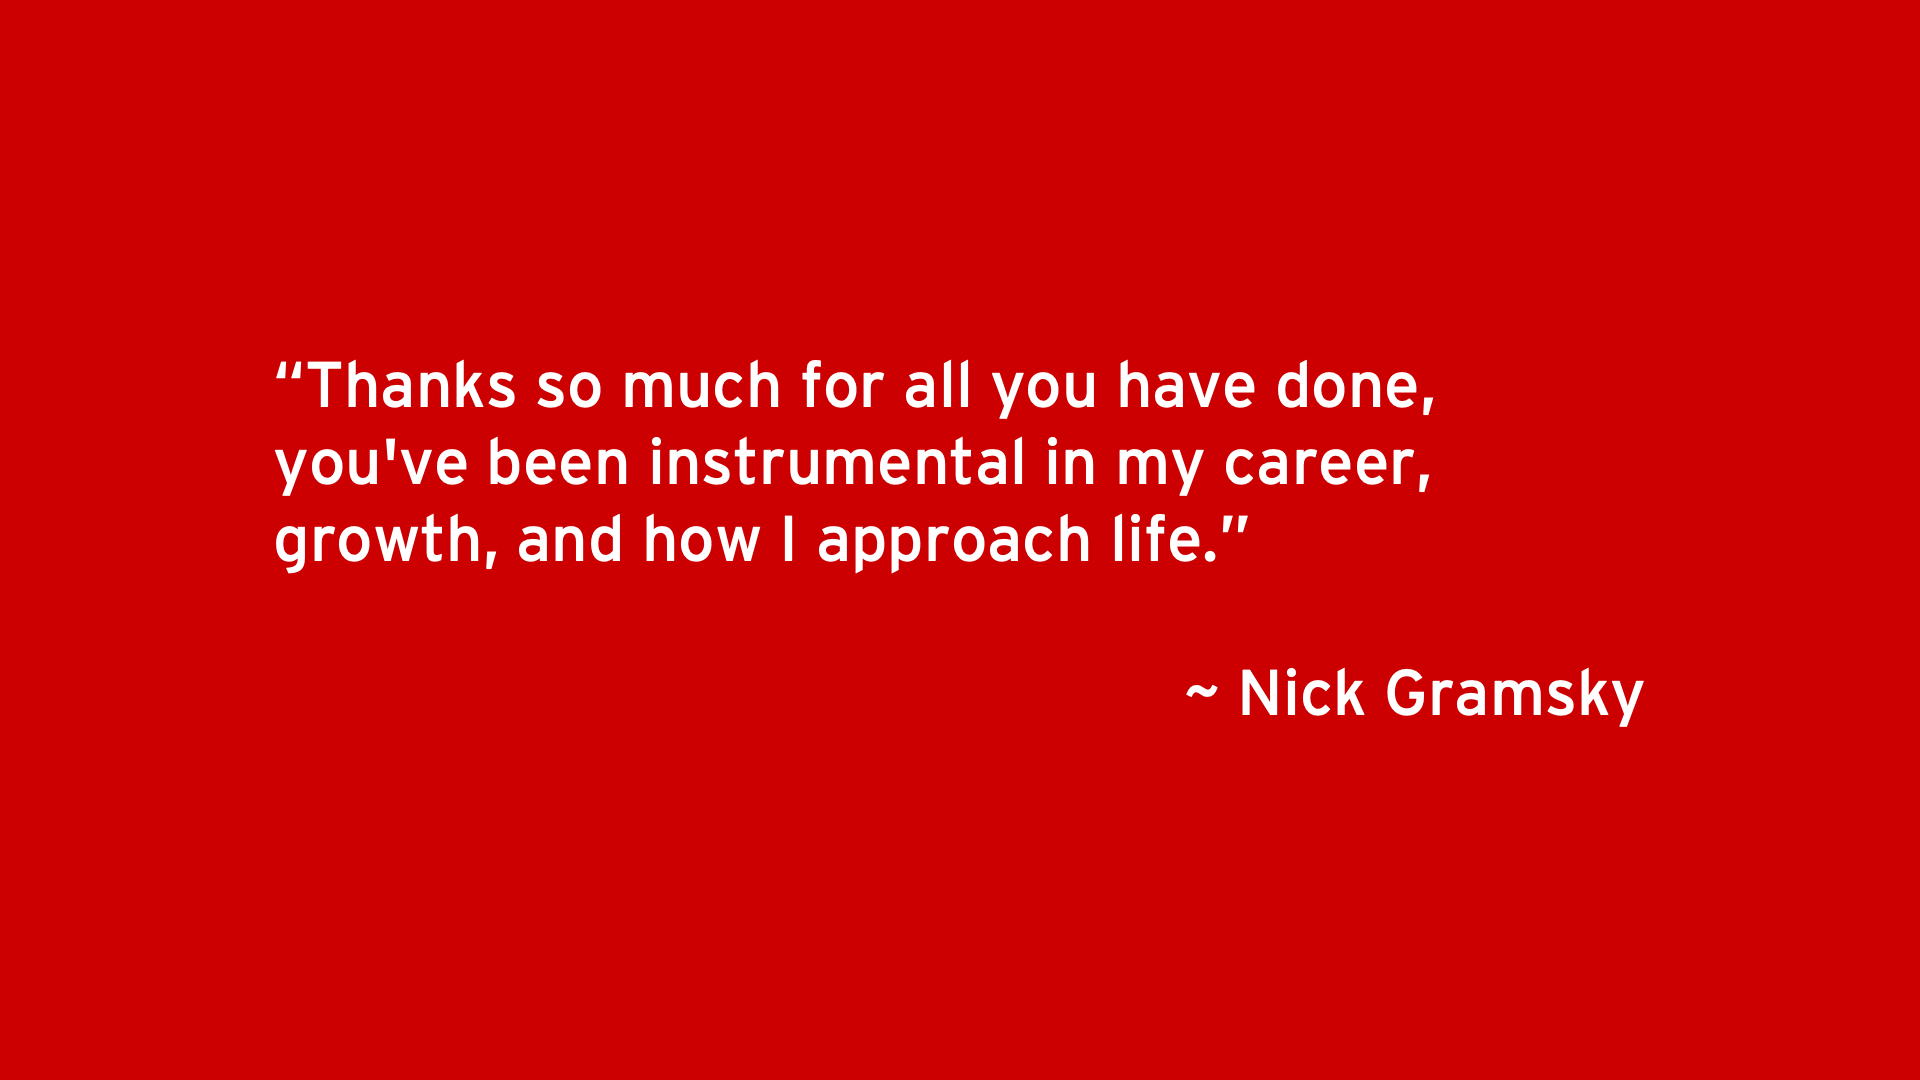 Thanks so much for all you have done, you've been instrumental in my career, growth, and how I approach life. - Nick Gramsky